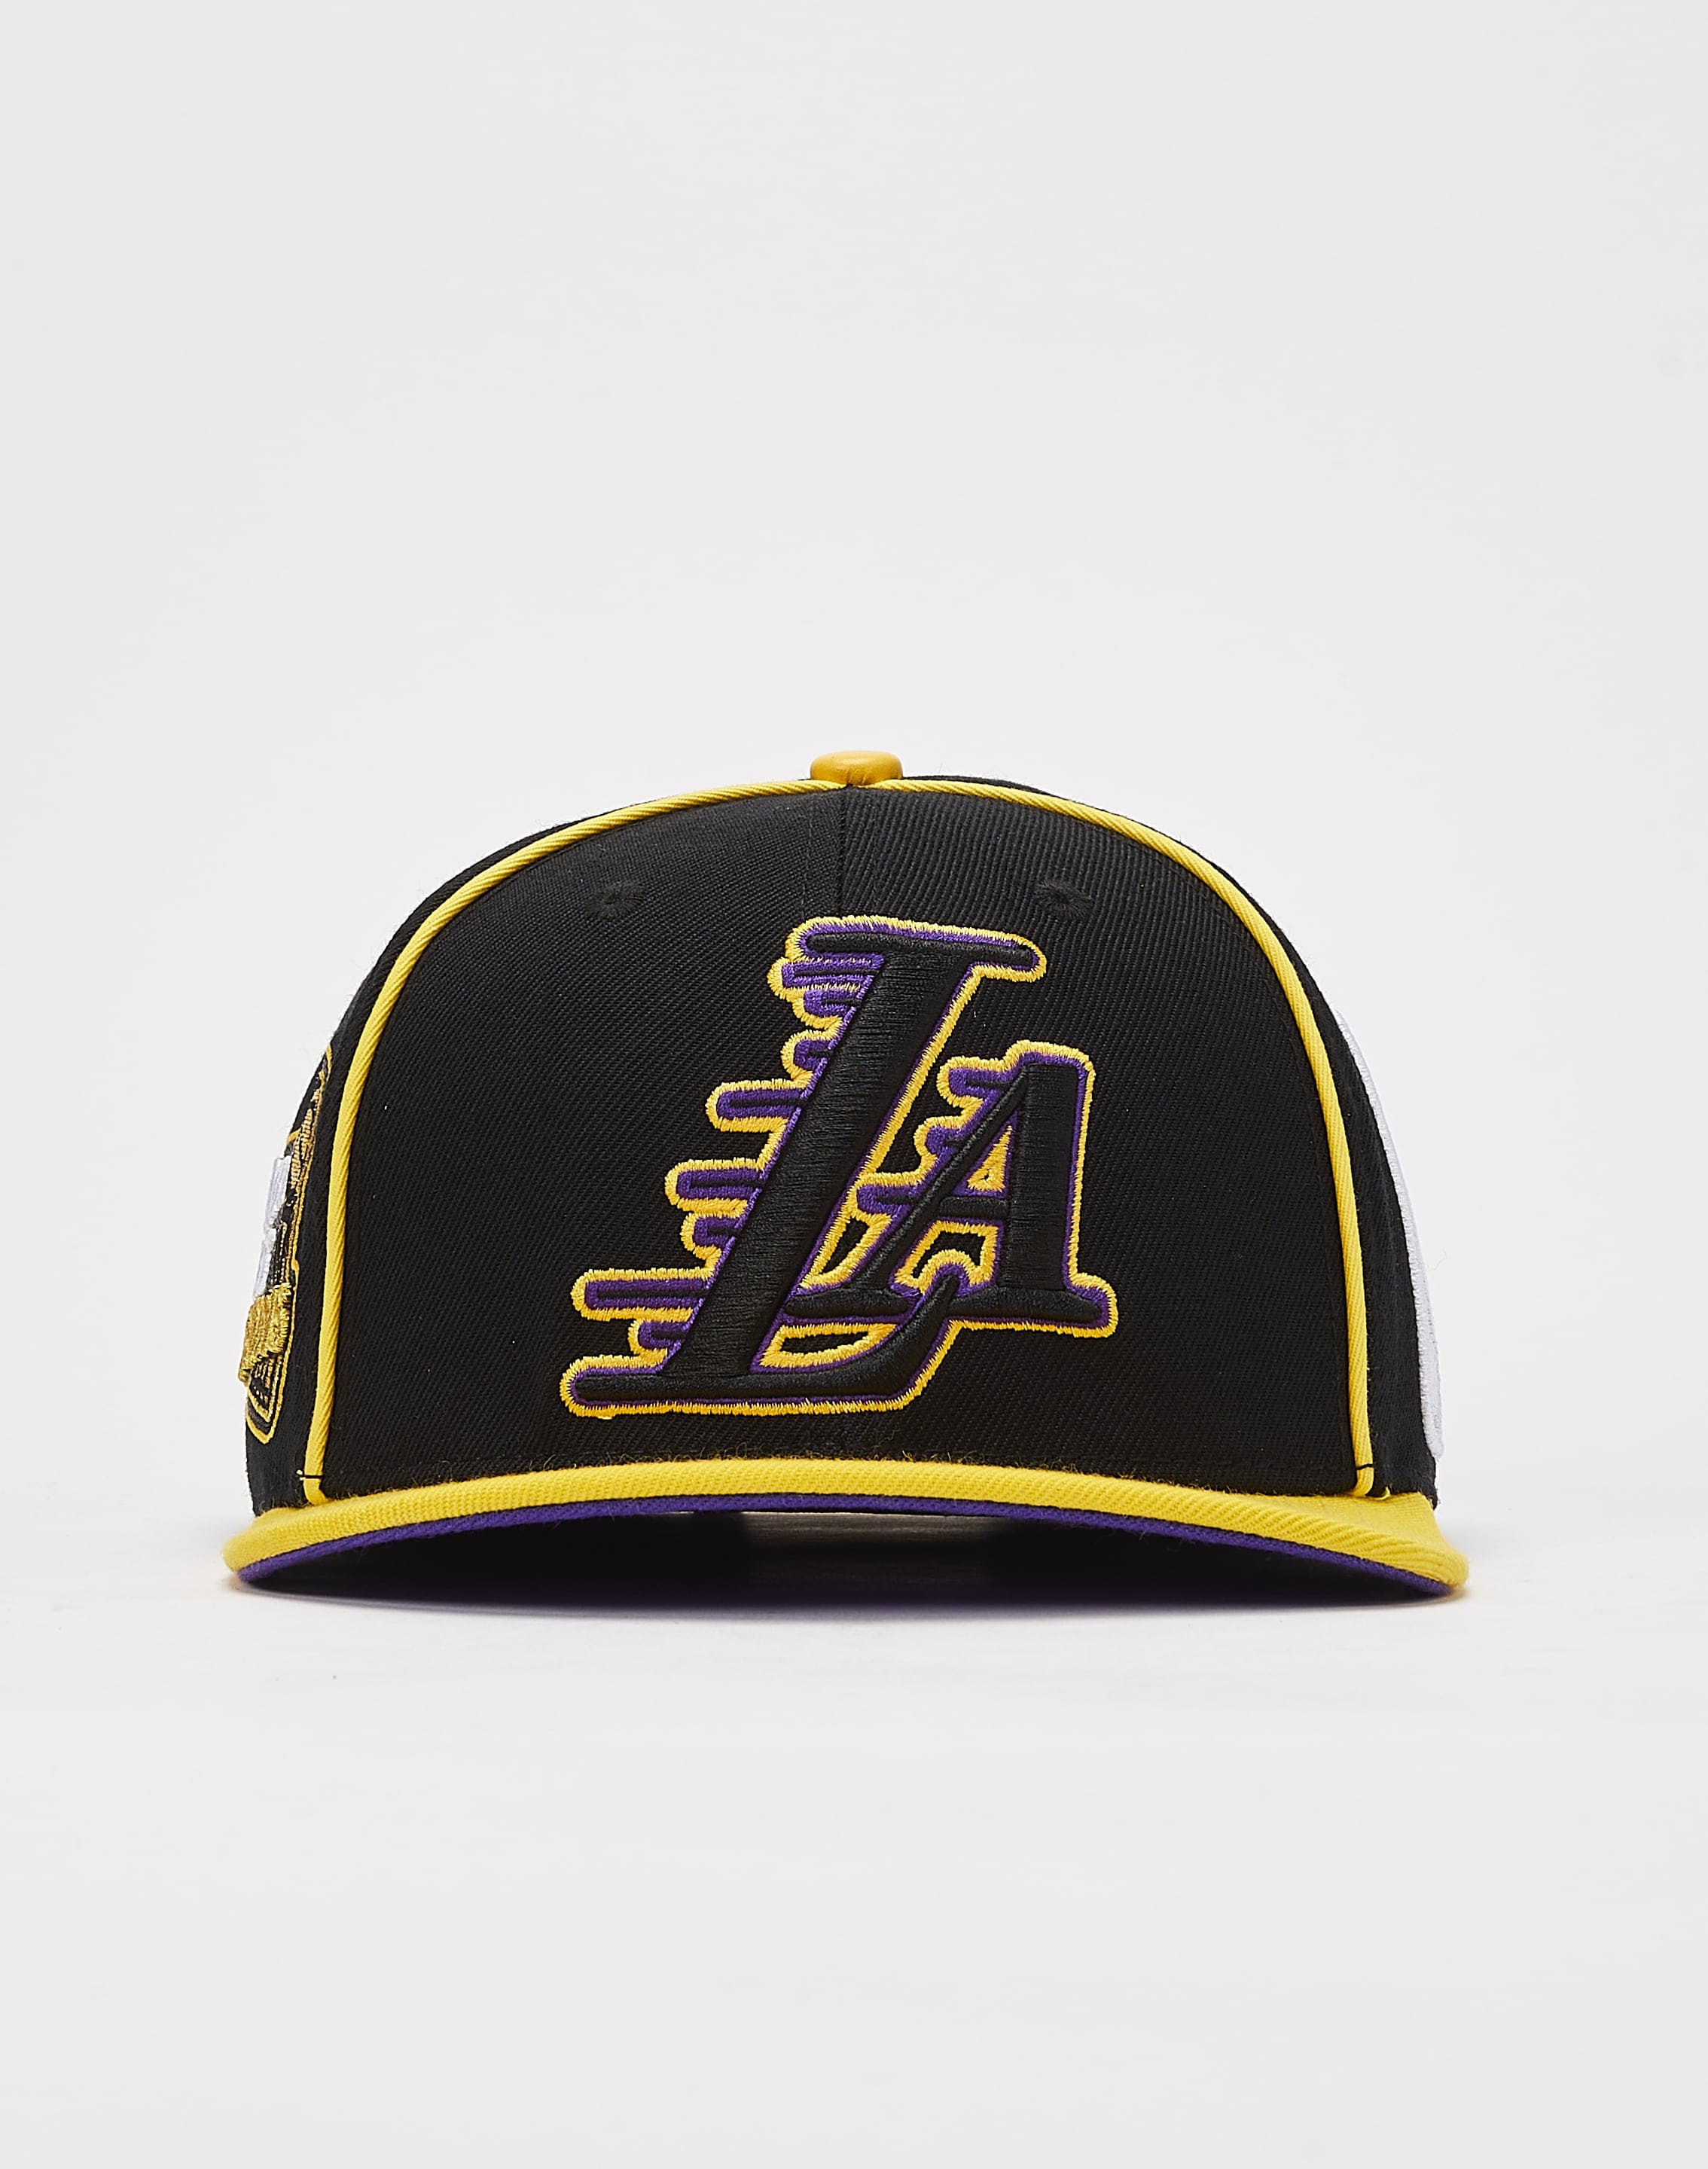 yellow and black lakers hat